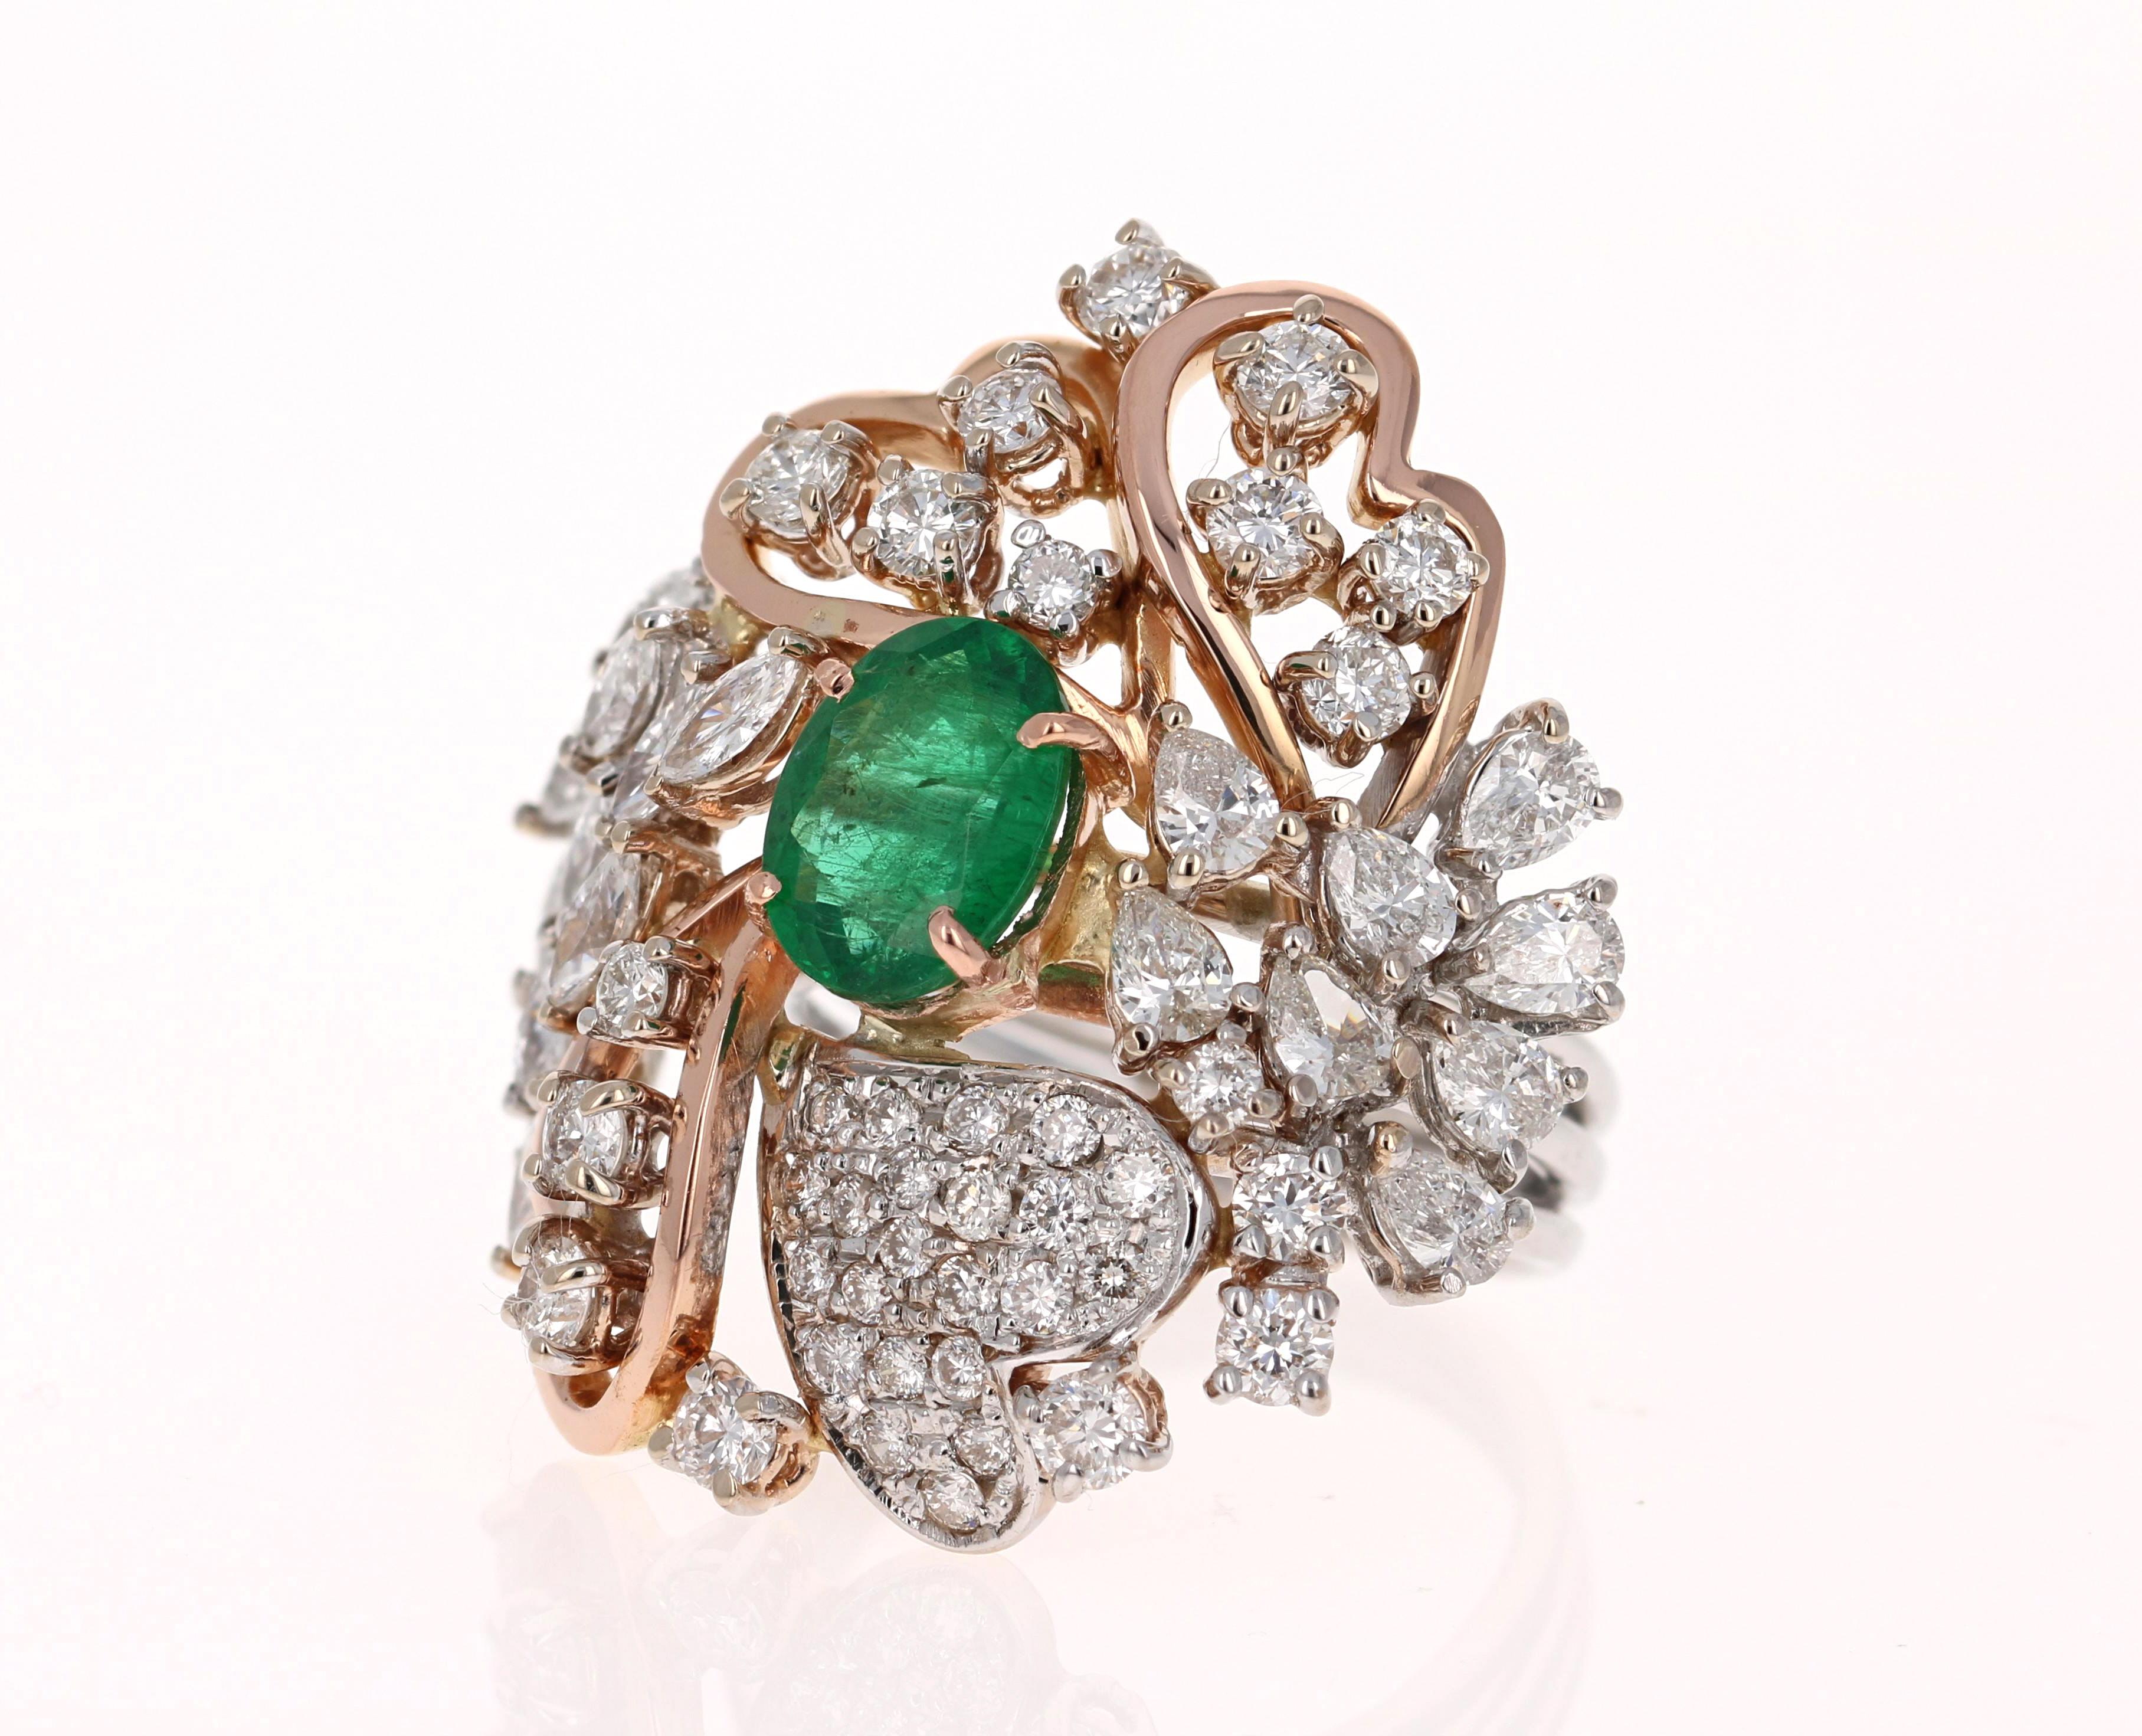 Stunning Vintage Inspired Emerald Diamond Ring! This Emerald ring is absolutely gorgeous. 
4.83 Carat Emerald and Diamond 18 Karat White Gold Vintage Cocktail Ring
8 Pear Cut Diamonds, 11 Marquise Cut Diamonds, and 40 Round Cut Diamonds = 3.10